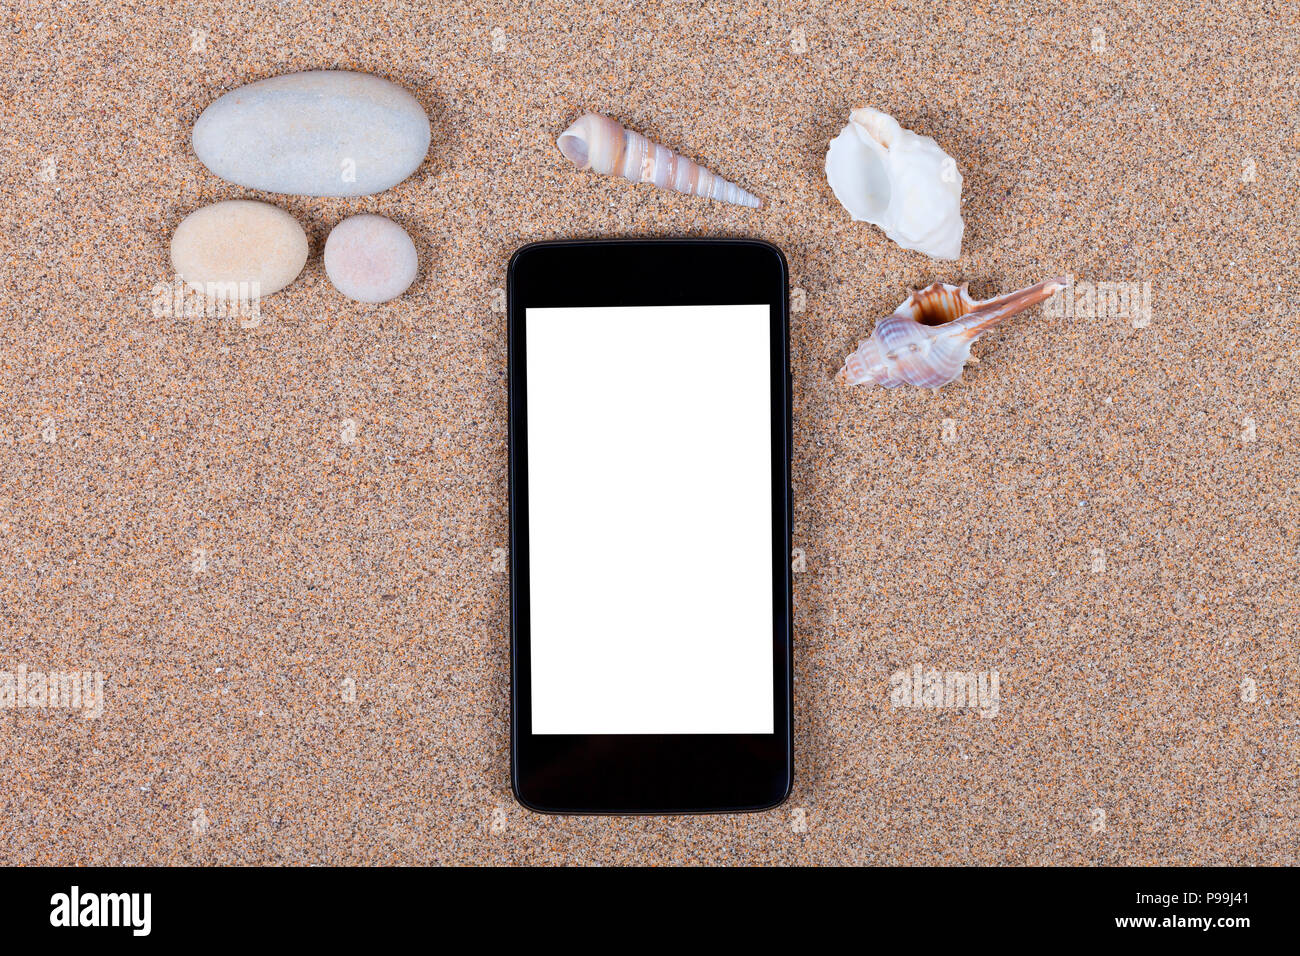 A smartphone with the blank screen placed on top of beach sand with shells and stones. Stock Photo